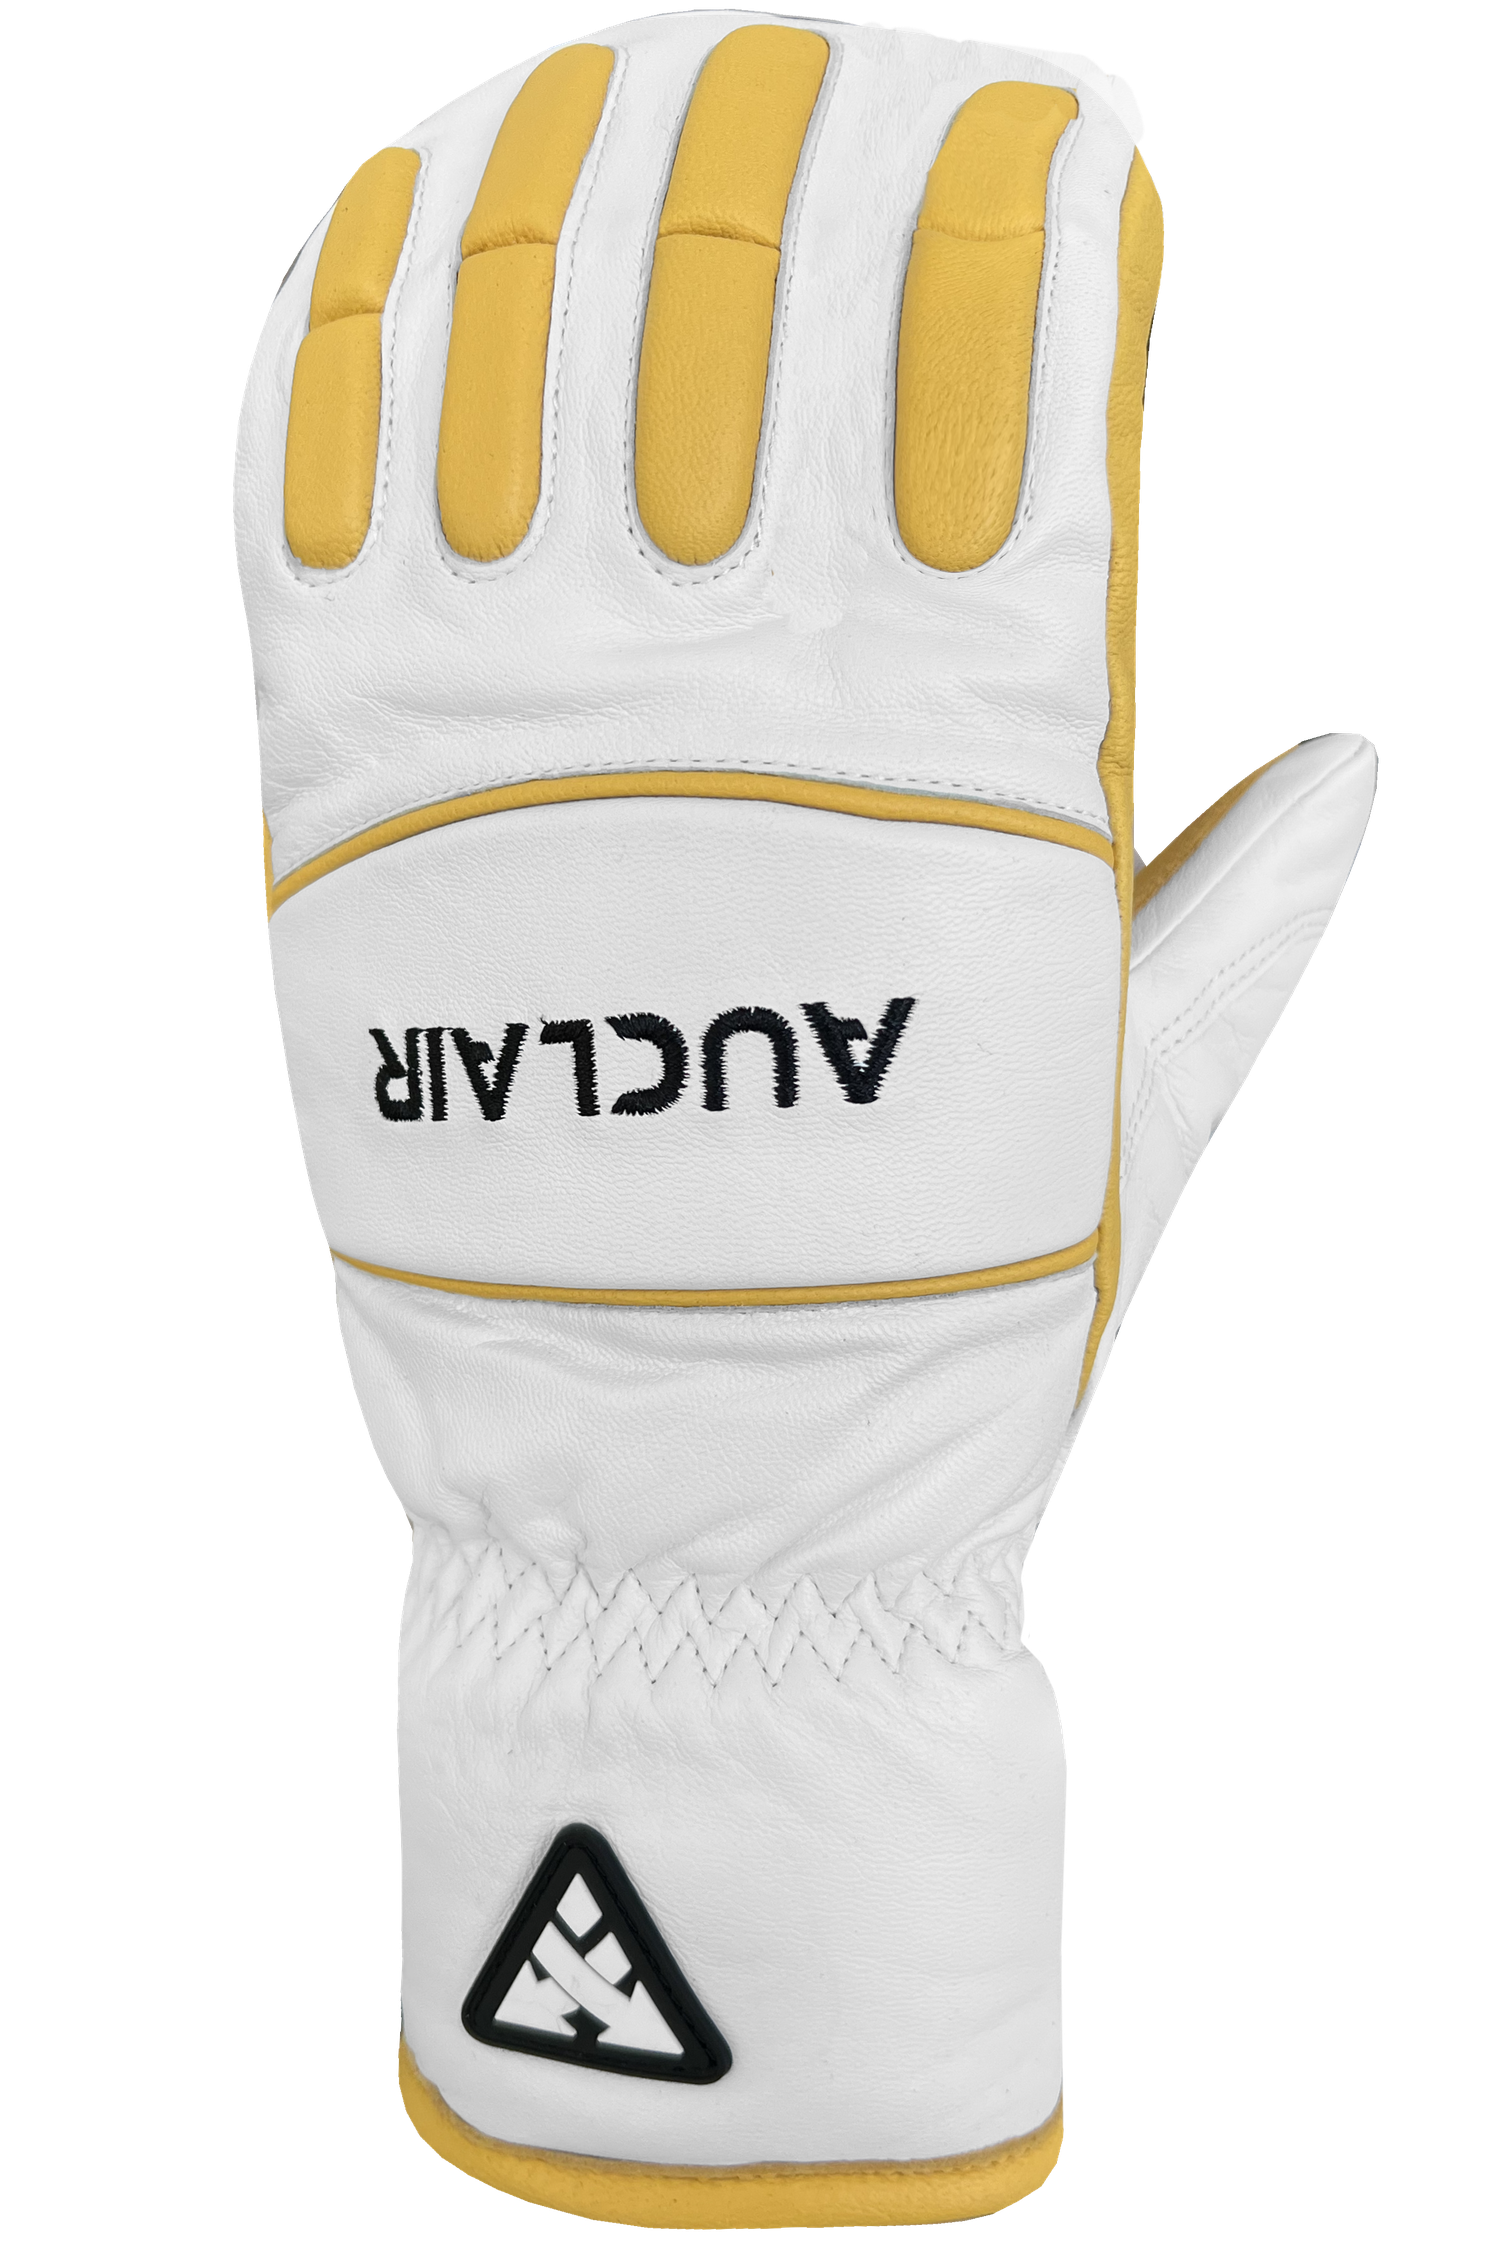 Son of T 4 Mitts - Adult, White/Gold